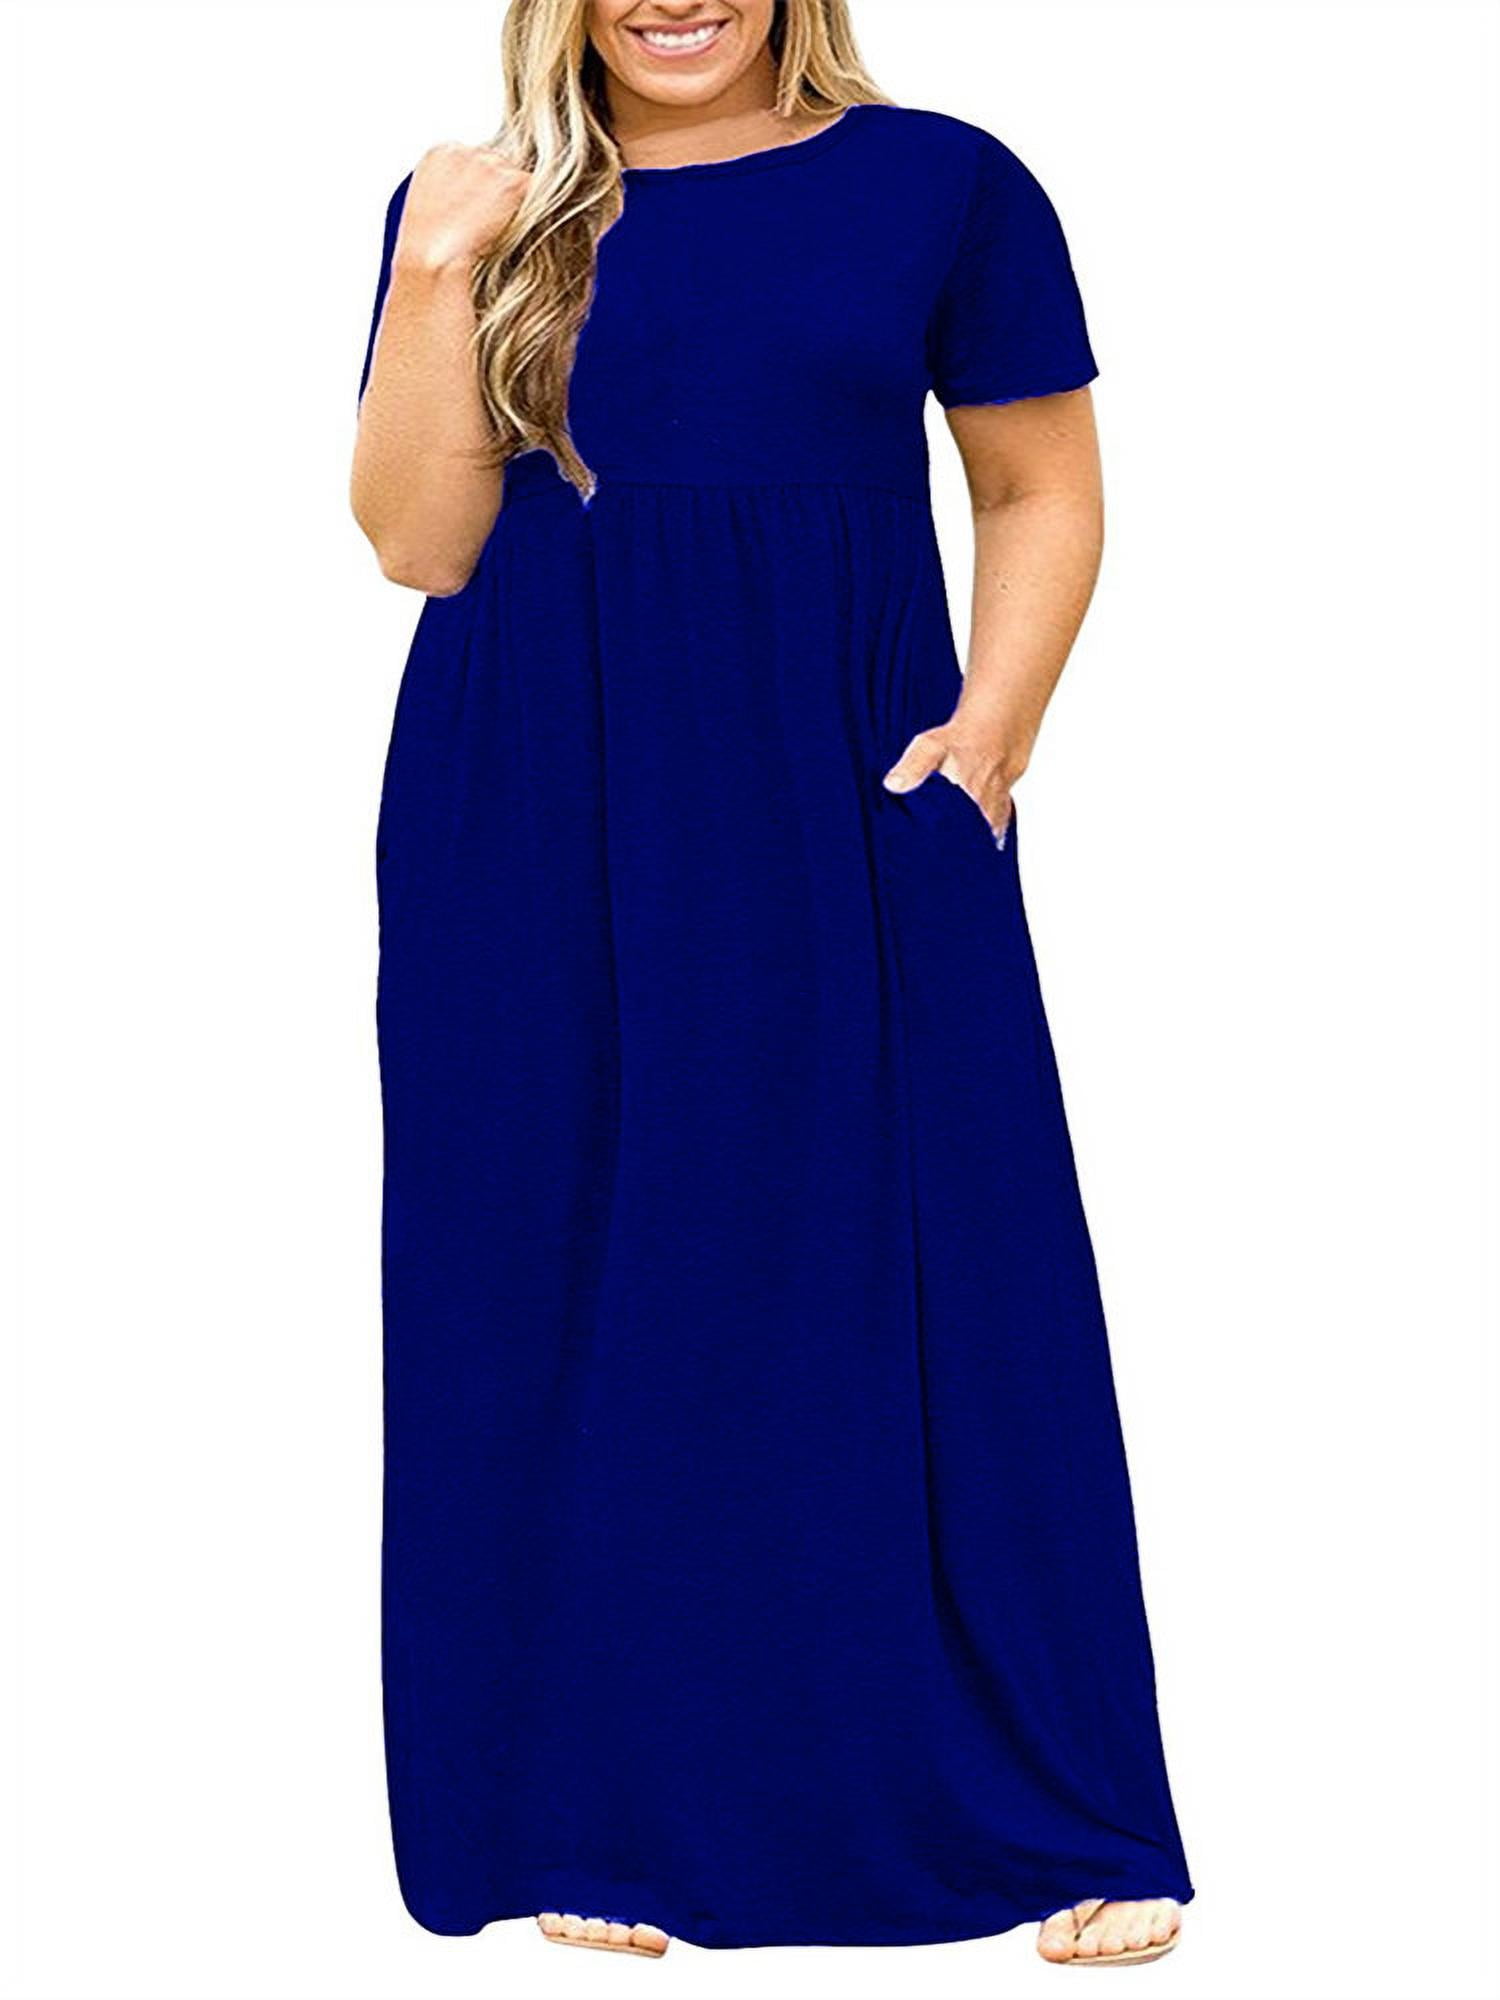 L-5XL Plus Size Women's Solid Color Casual Long Dress with Pocket ...